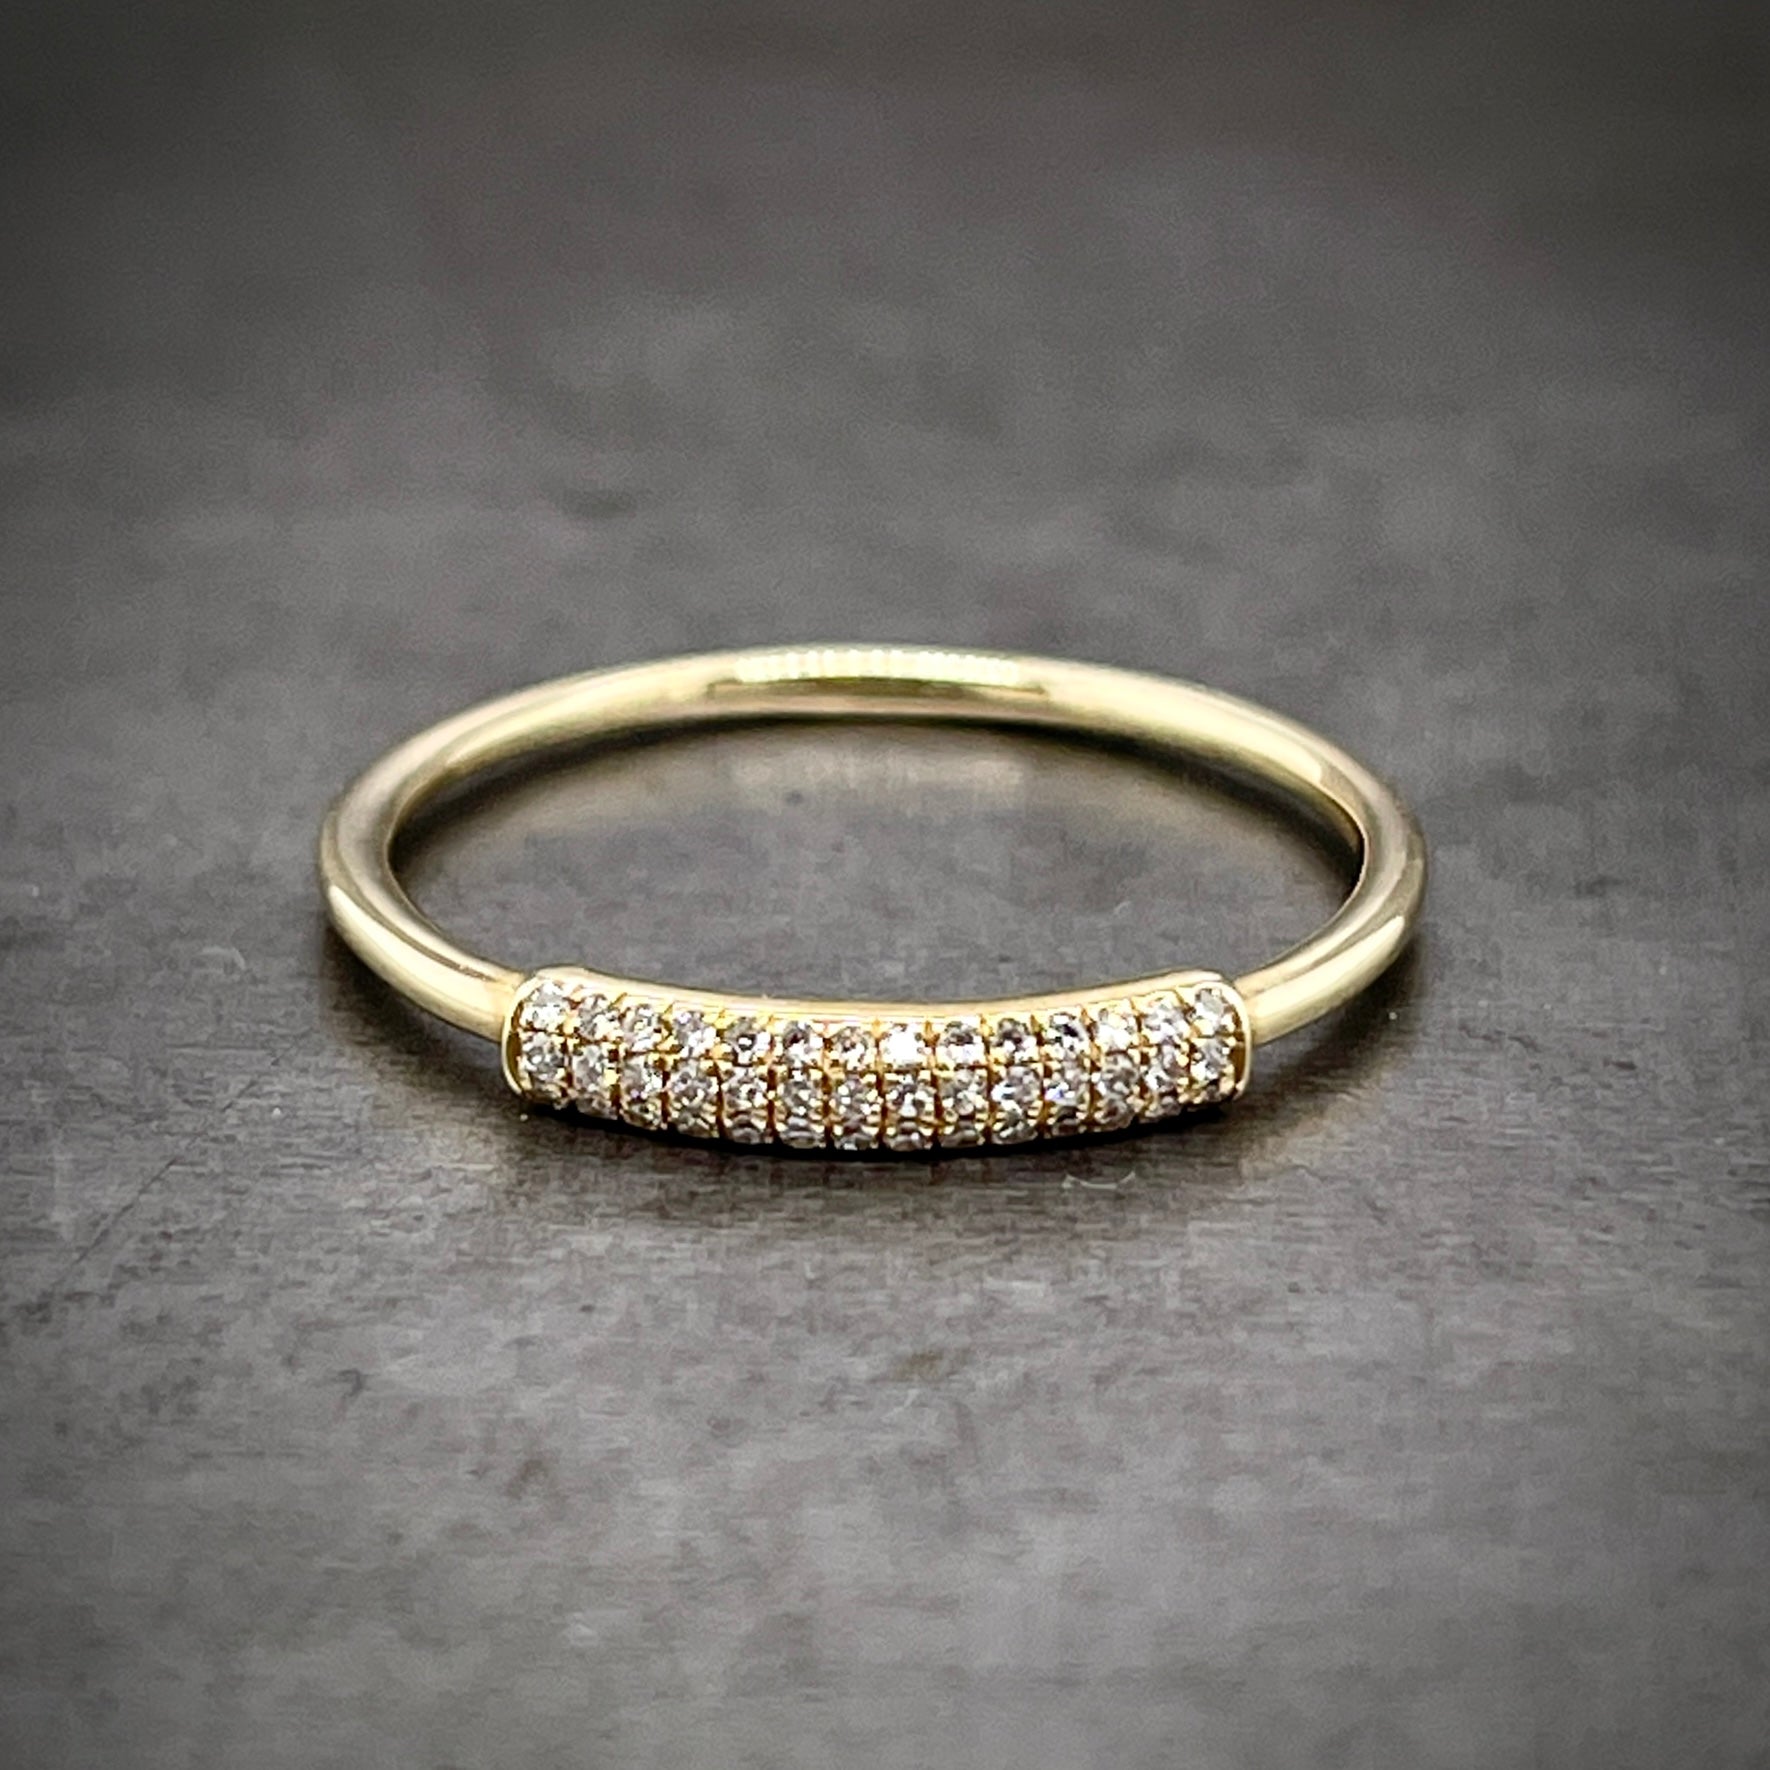 Full view of Diamond and Gold Band. The top of the ring features a slightly larger piece of wire that has two rows of diamonds set in it. The row is 14 diamonds long.